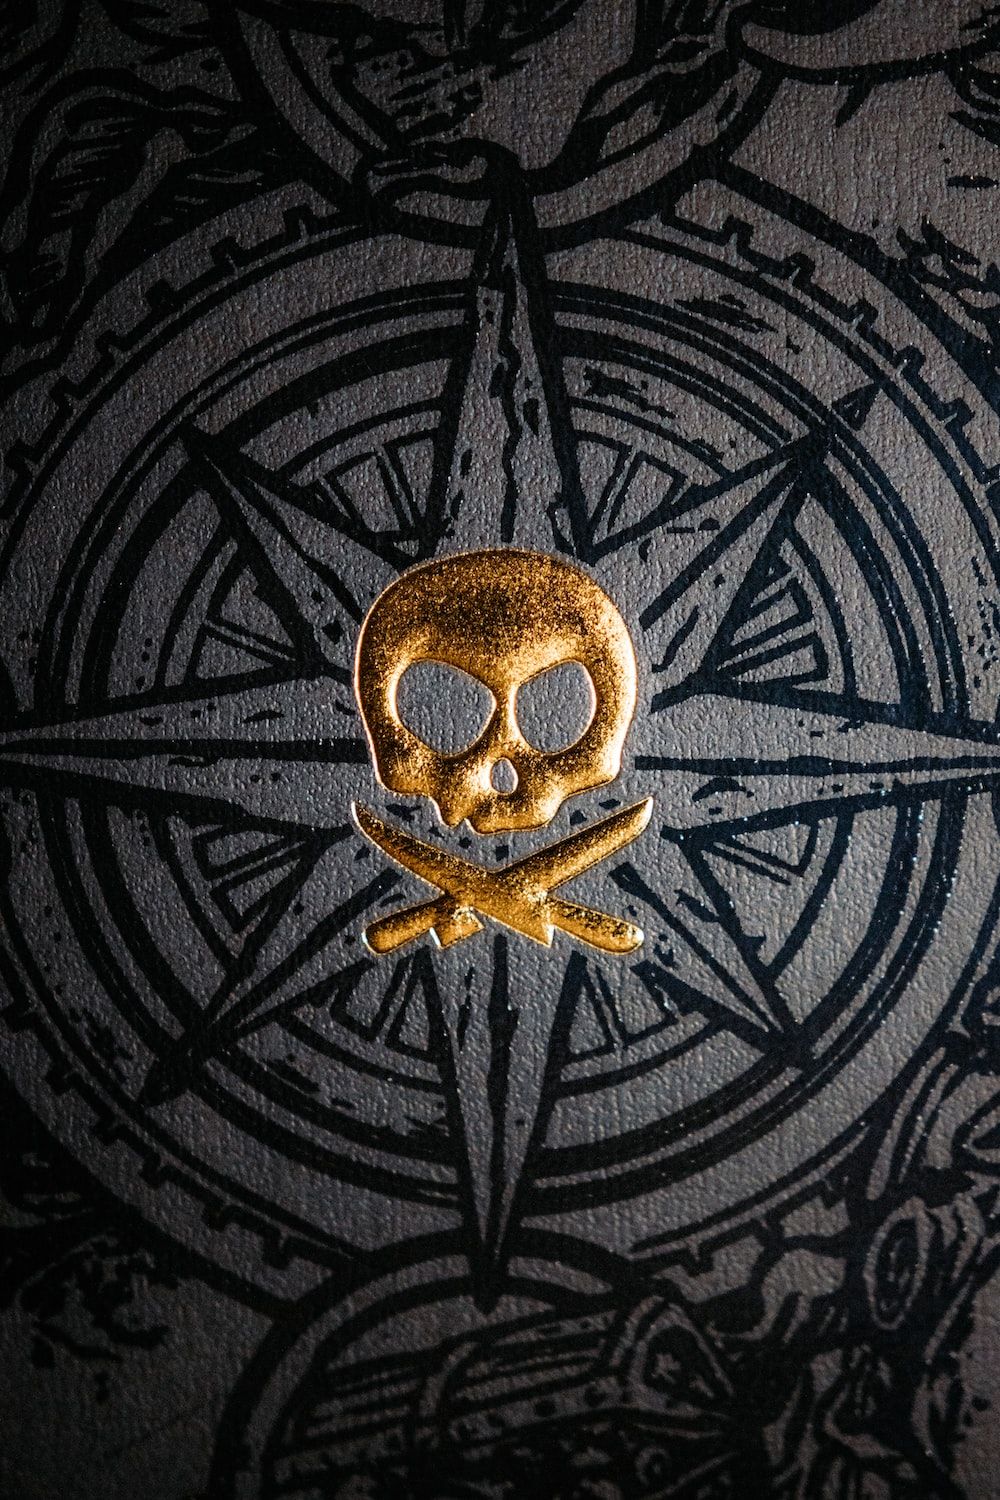 A gold skull and crossbones on top of an image - Pirate